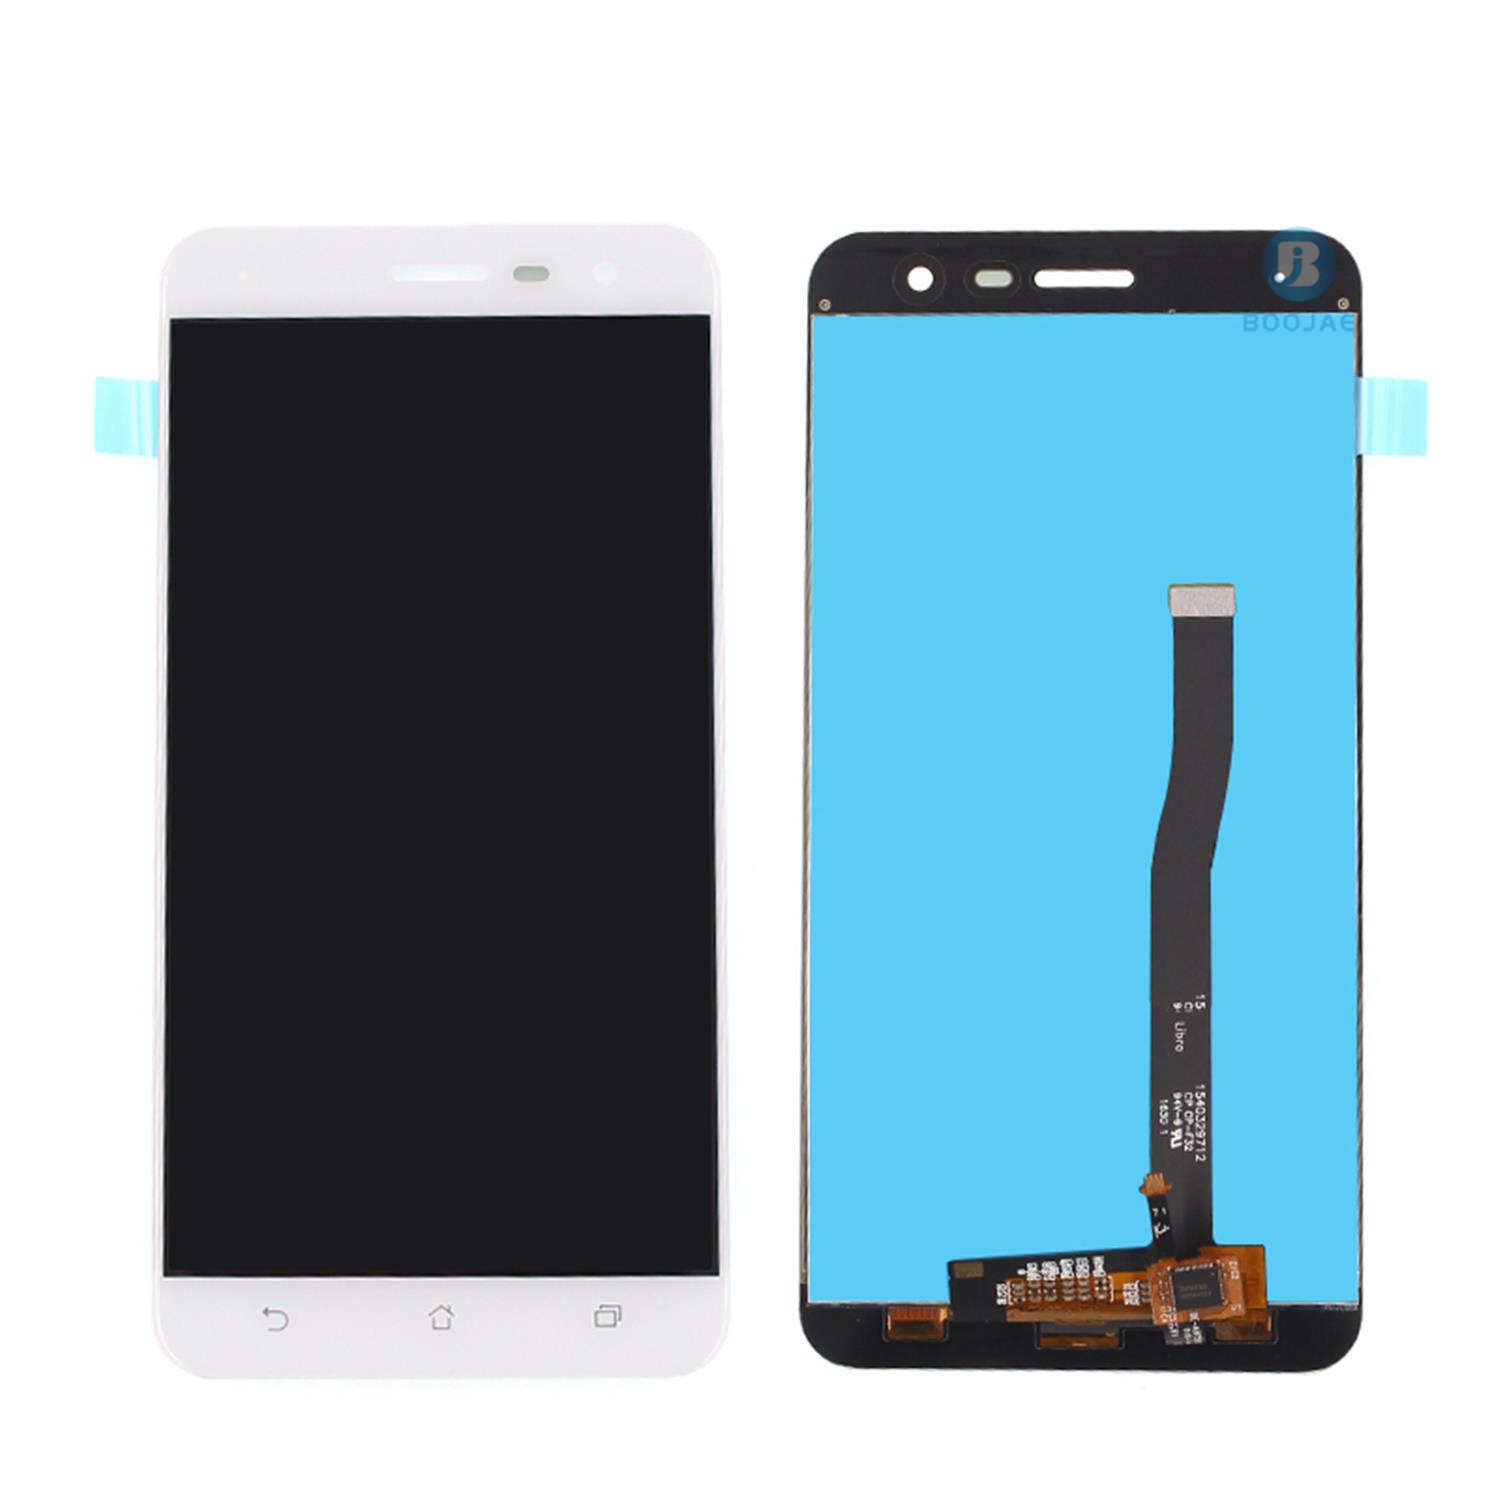 Asus Zenfone ZE552KL LCD Screen Display, Lcd Assembly Replacement